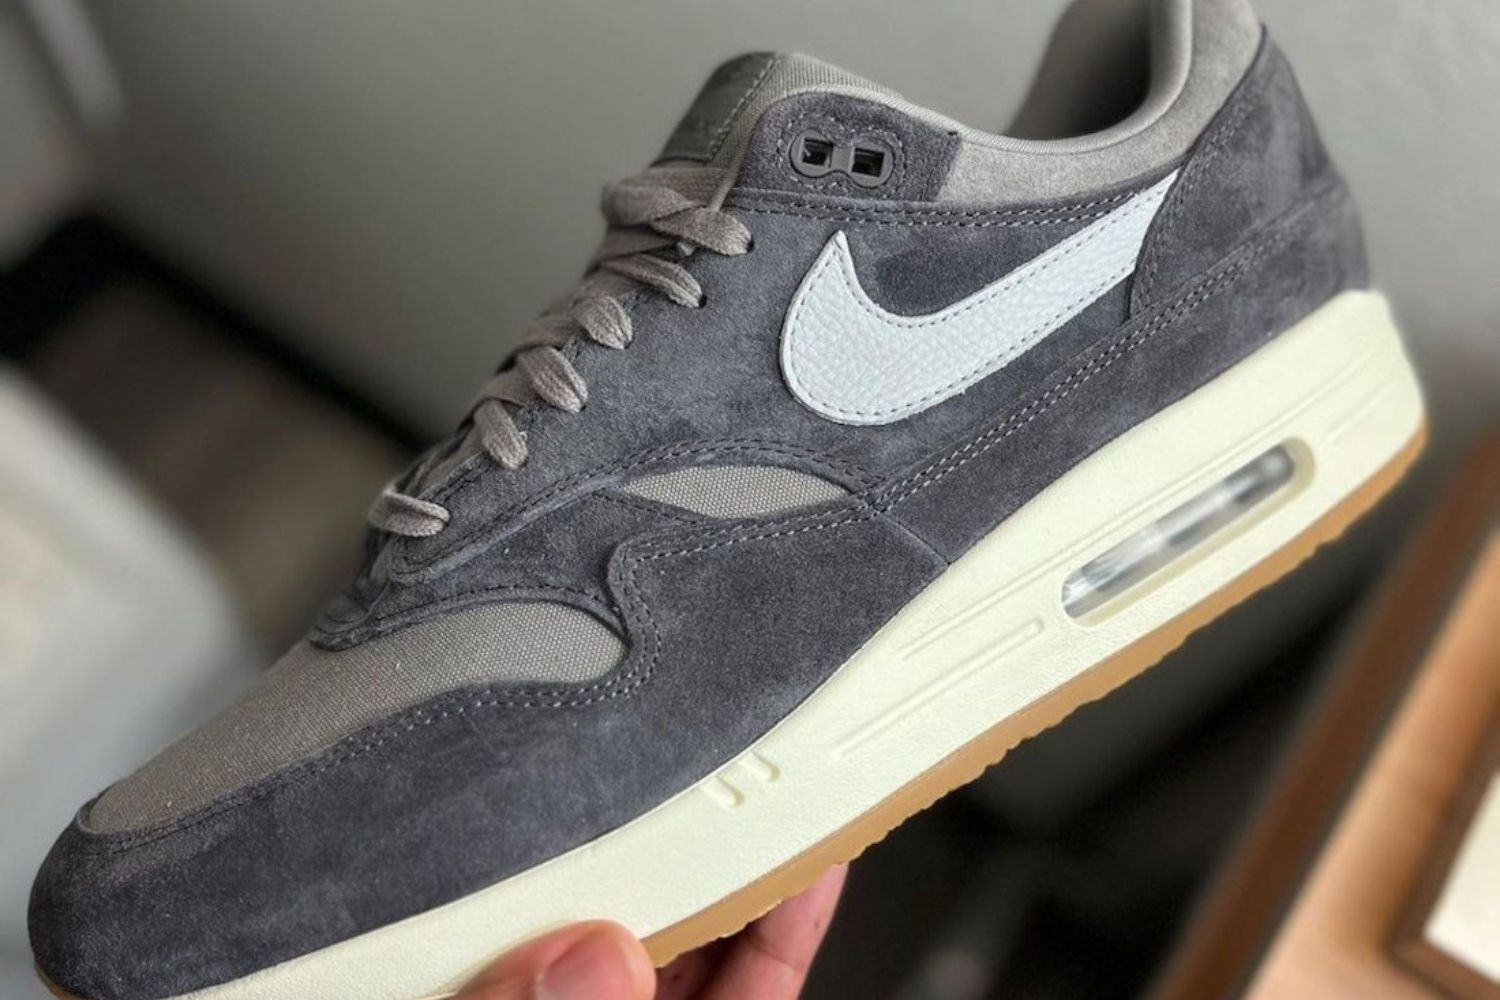 First images of the Nike Air Max 1 PRM 'Soft Grey'